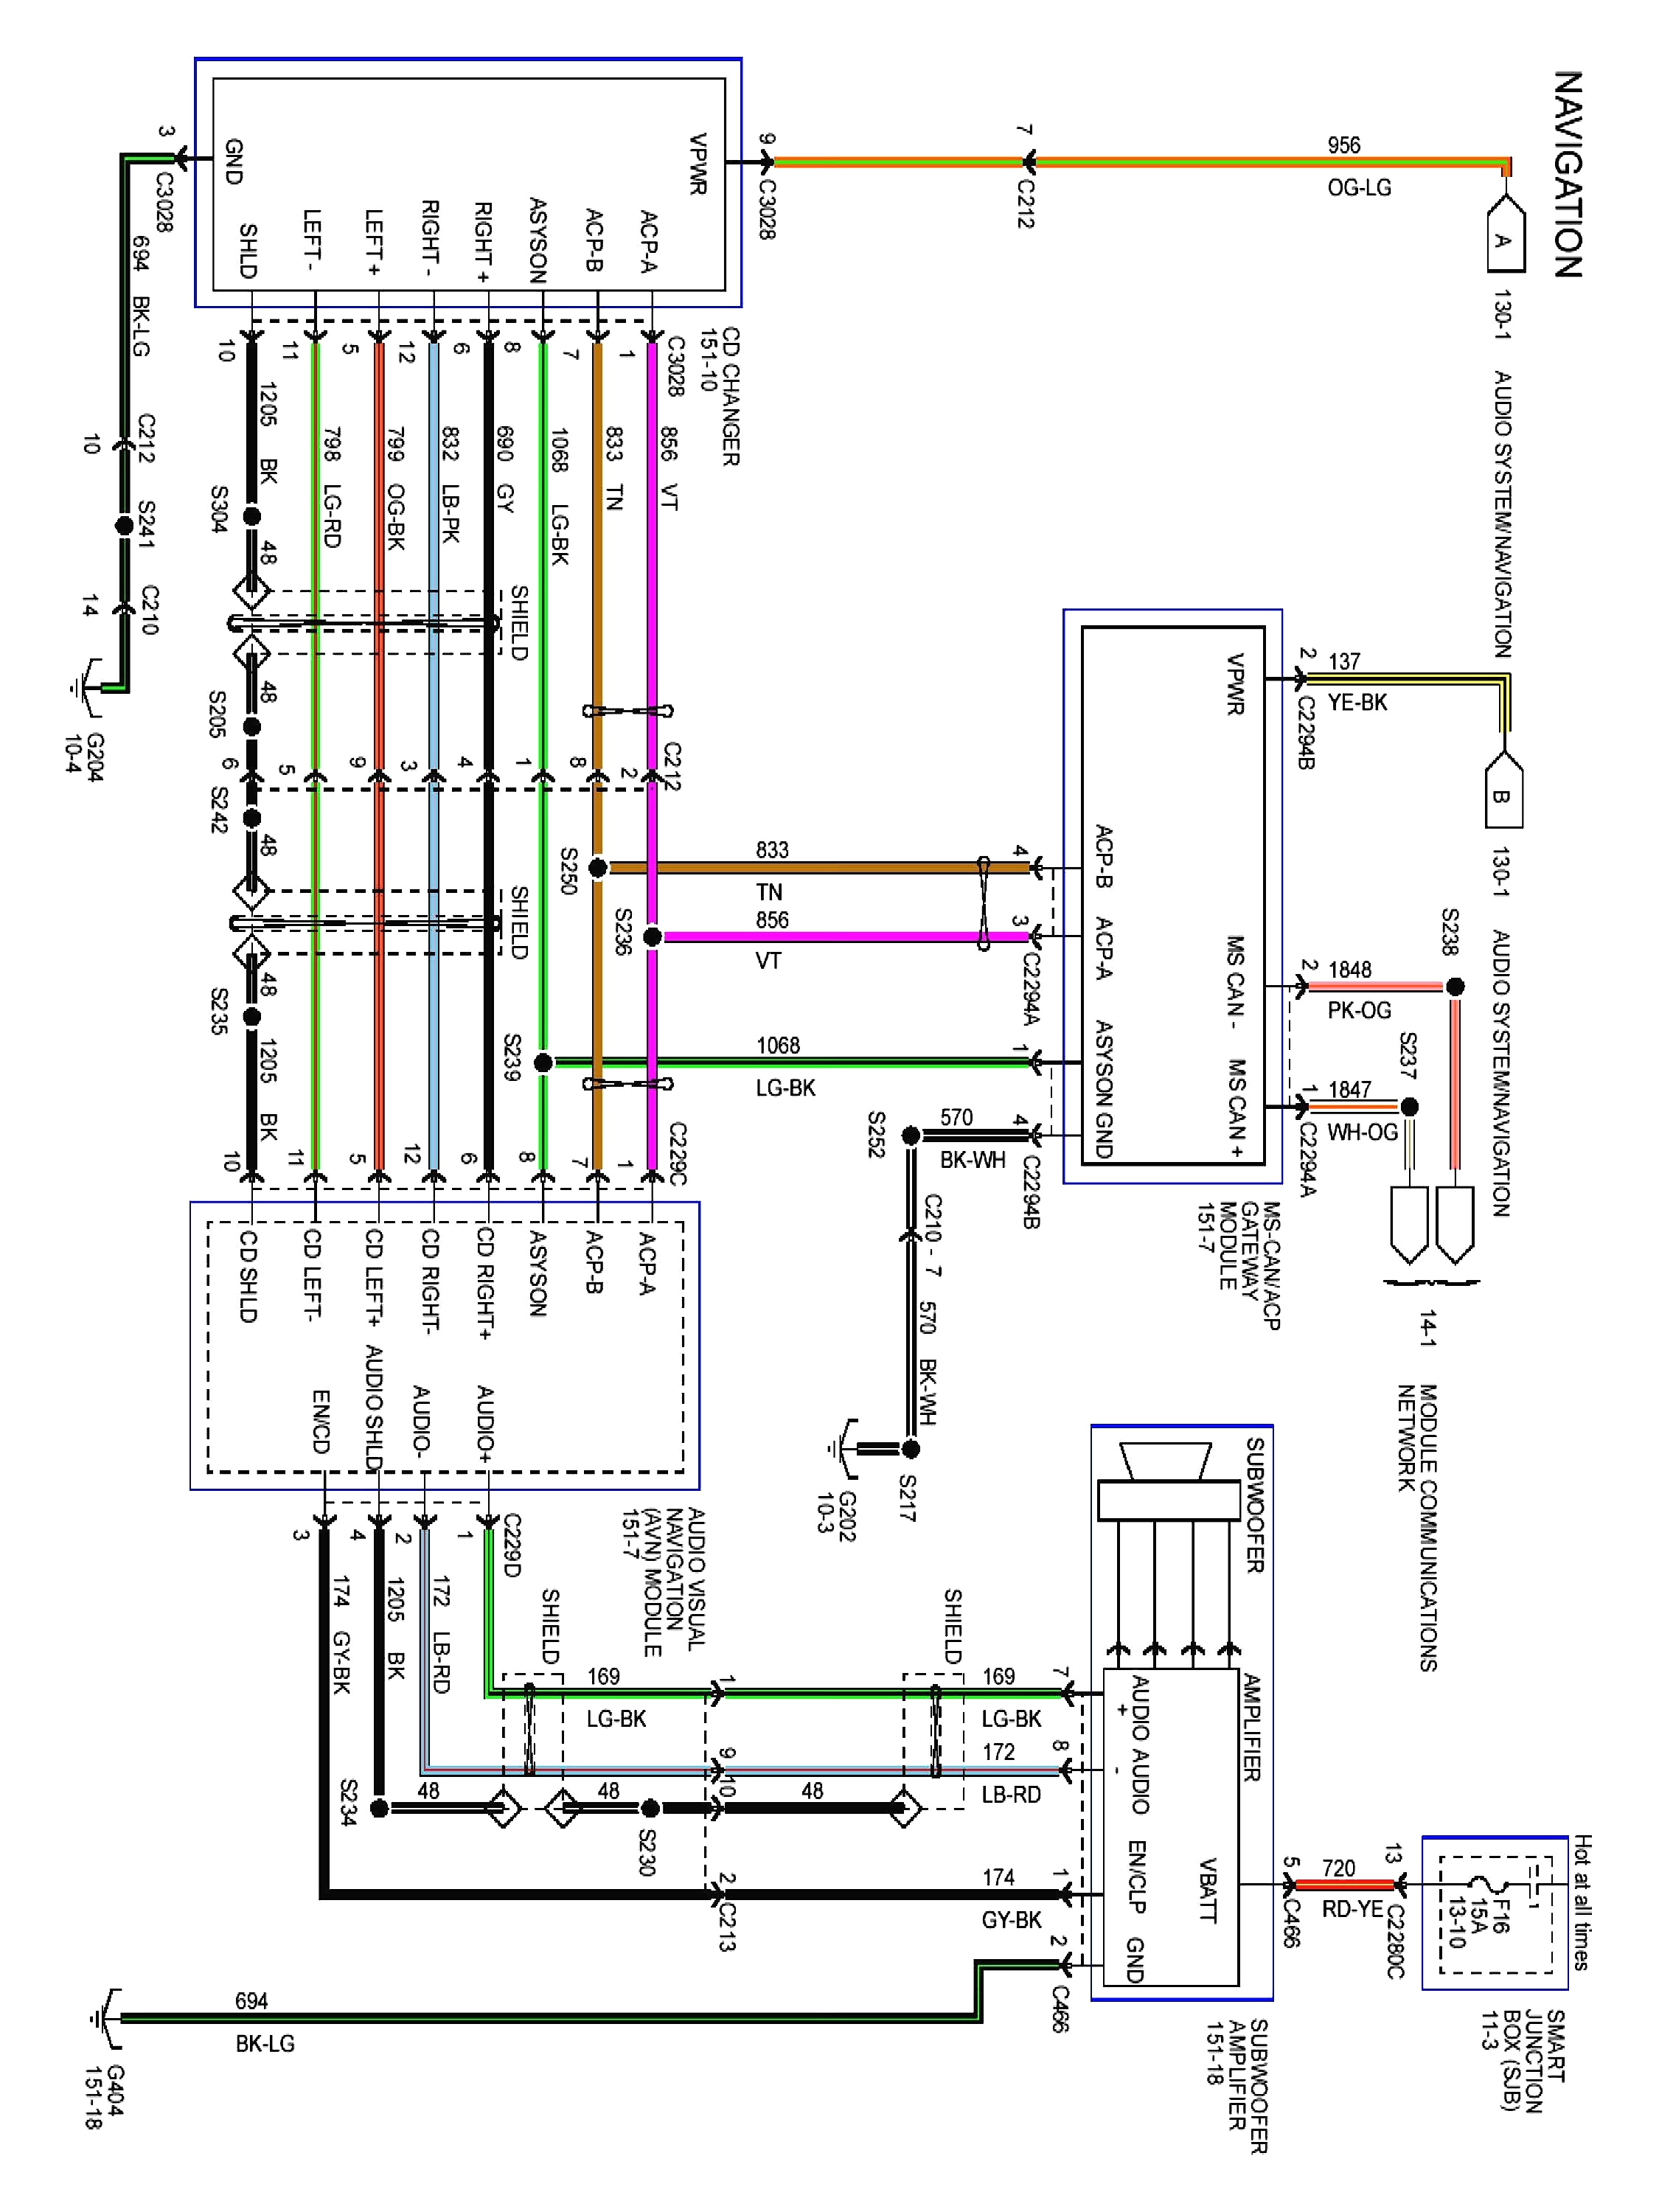 2004 ford expedition radio wiring diagram new wiring diagram 2003 ford expedition stereo best and fonar of 2004 ford expedition radio wiring diagram jpg